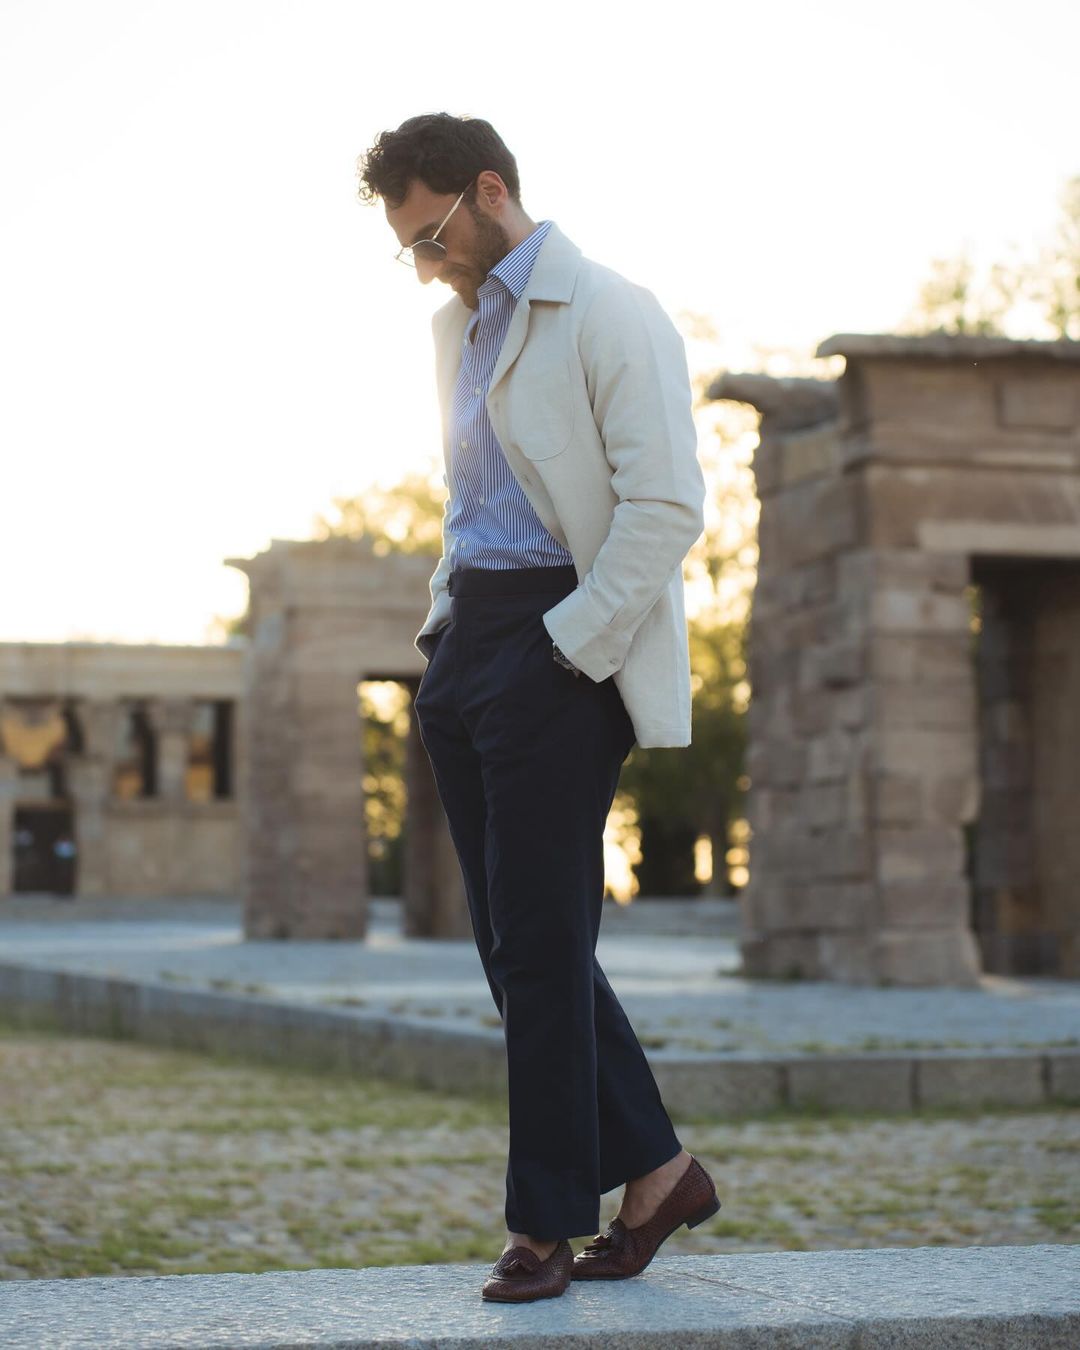 Model outside wearing the linen shirt jacket for men by Luxire in cream hands in pockets